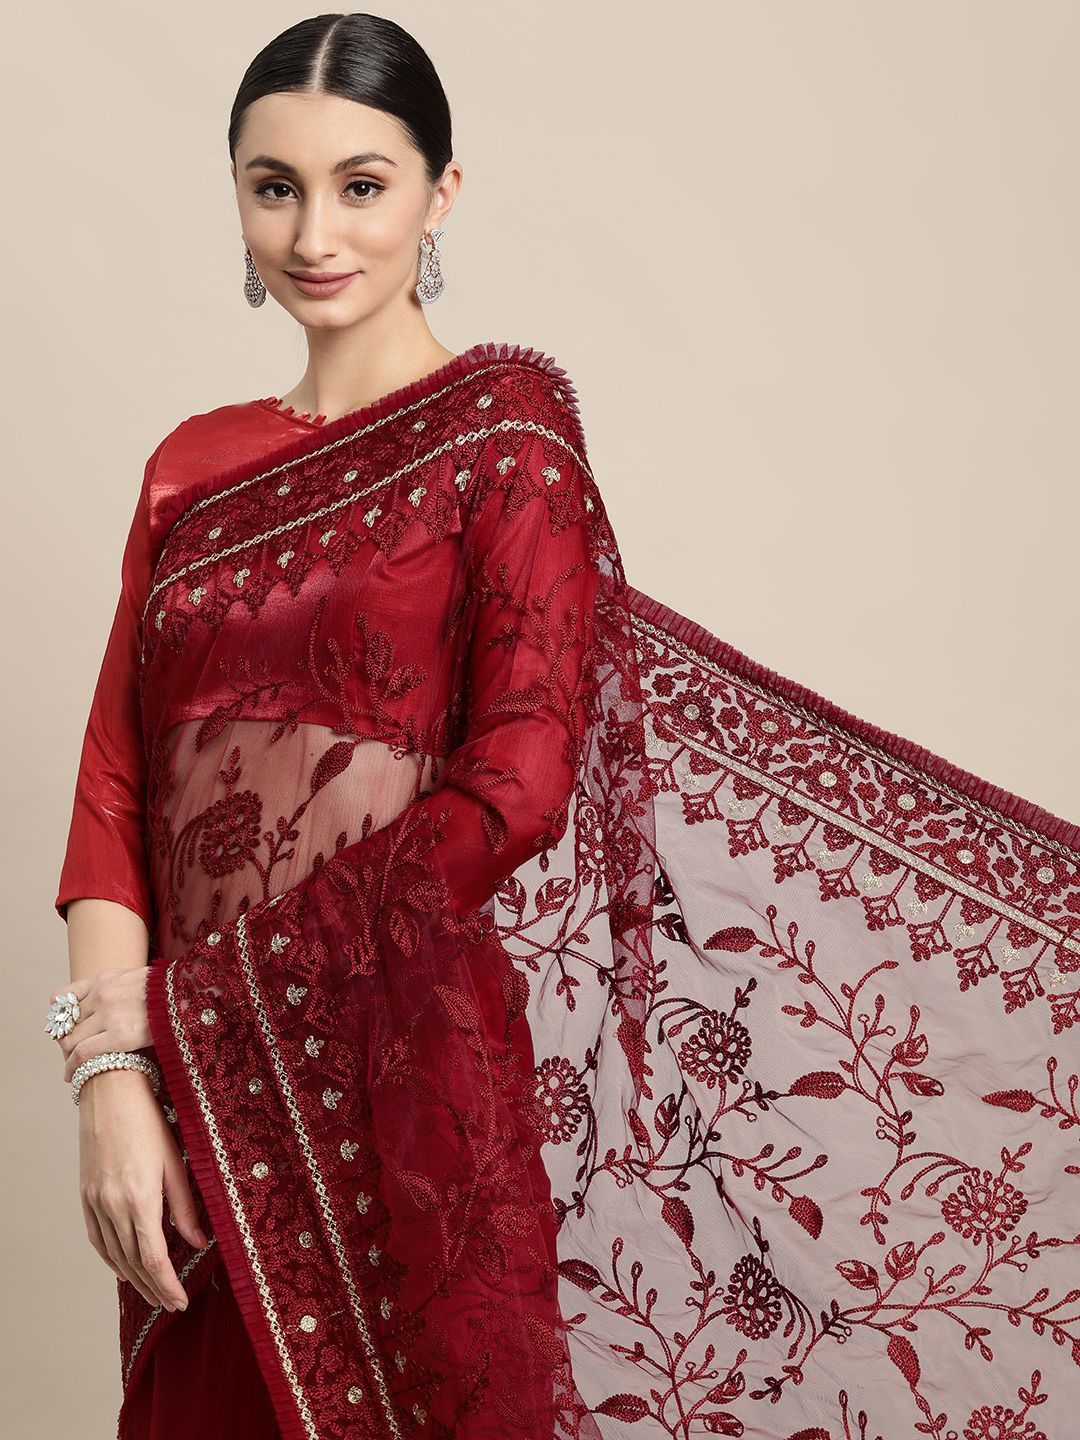 VAIRAGEE Maroon Floral Embroidered Net Saree Price in India